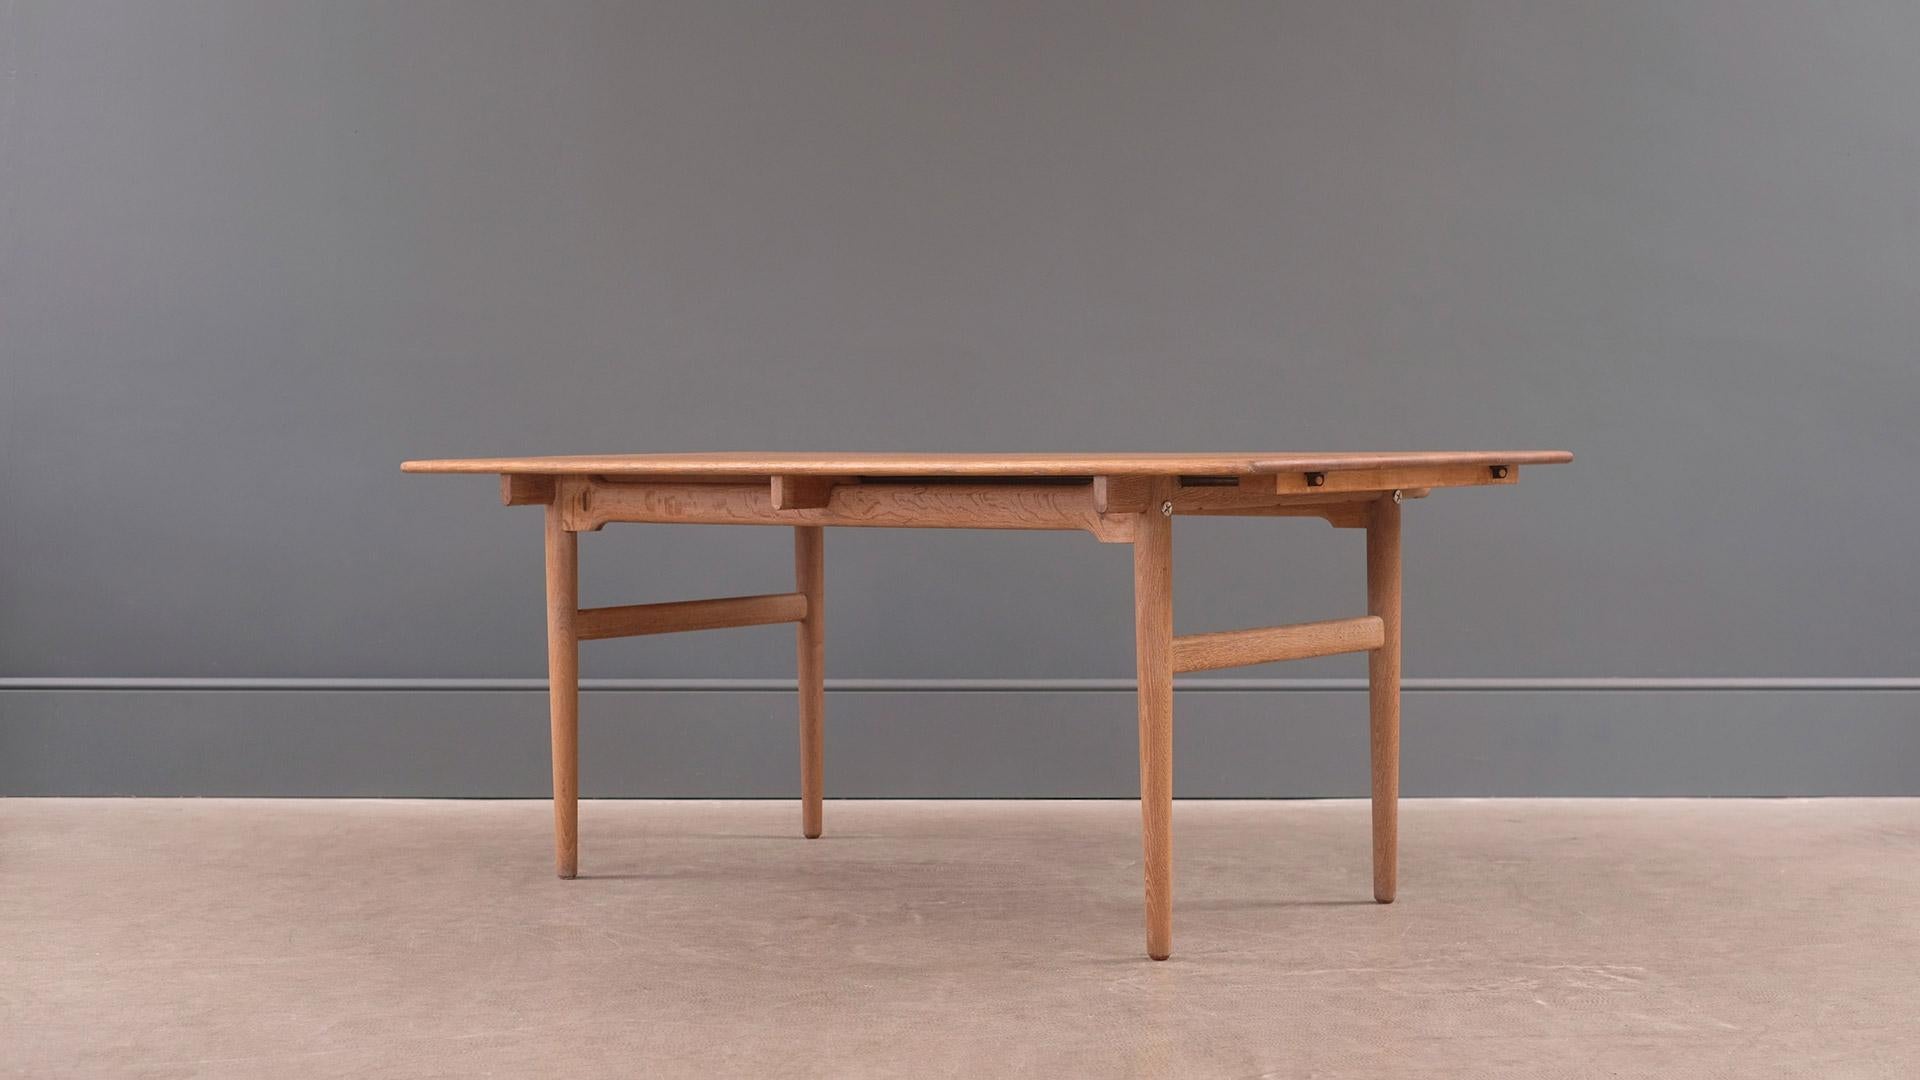 Super rare and beautiful dining table in solid figured oak with one occasional leaf designed by Hans Wegner for cabinetmaker Andreas Tuck, 1950s Denmark. Exceptional example with the most wonderful patina.